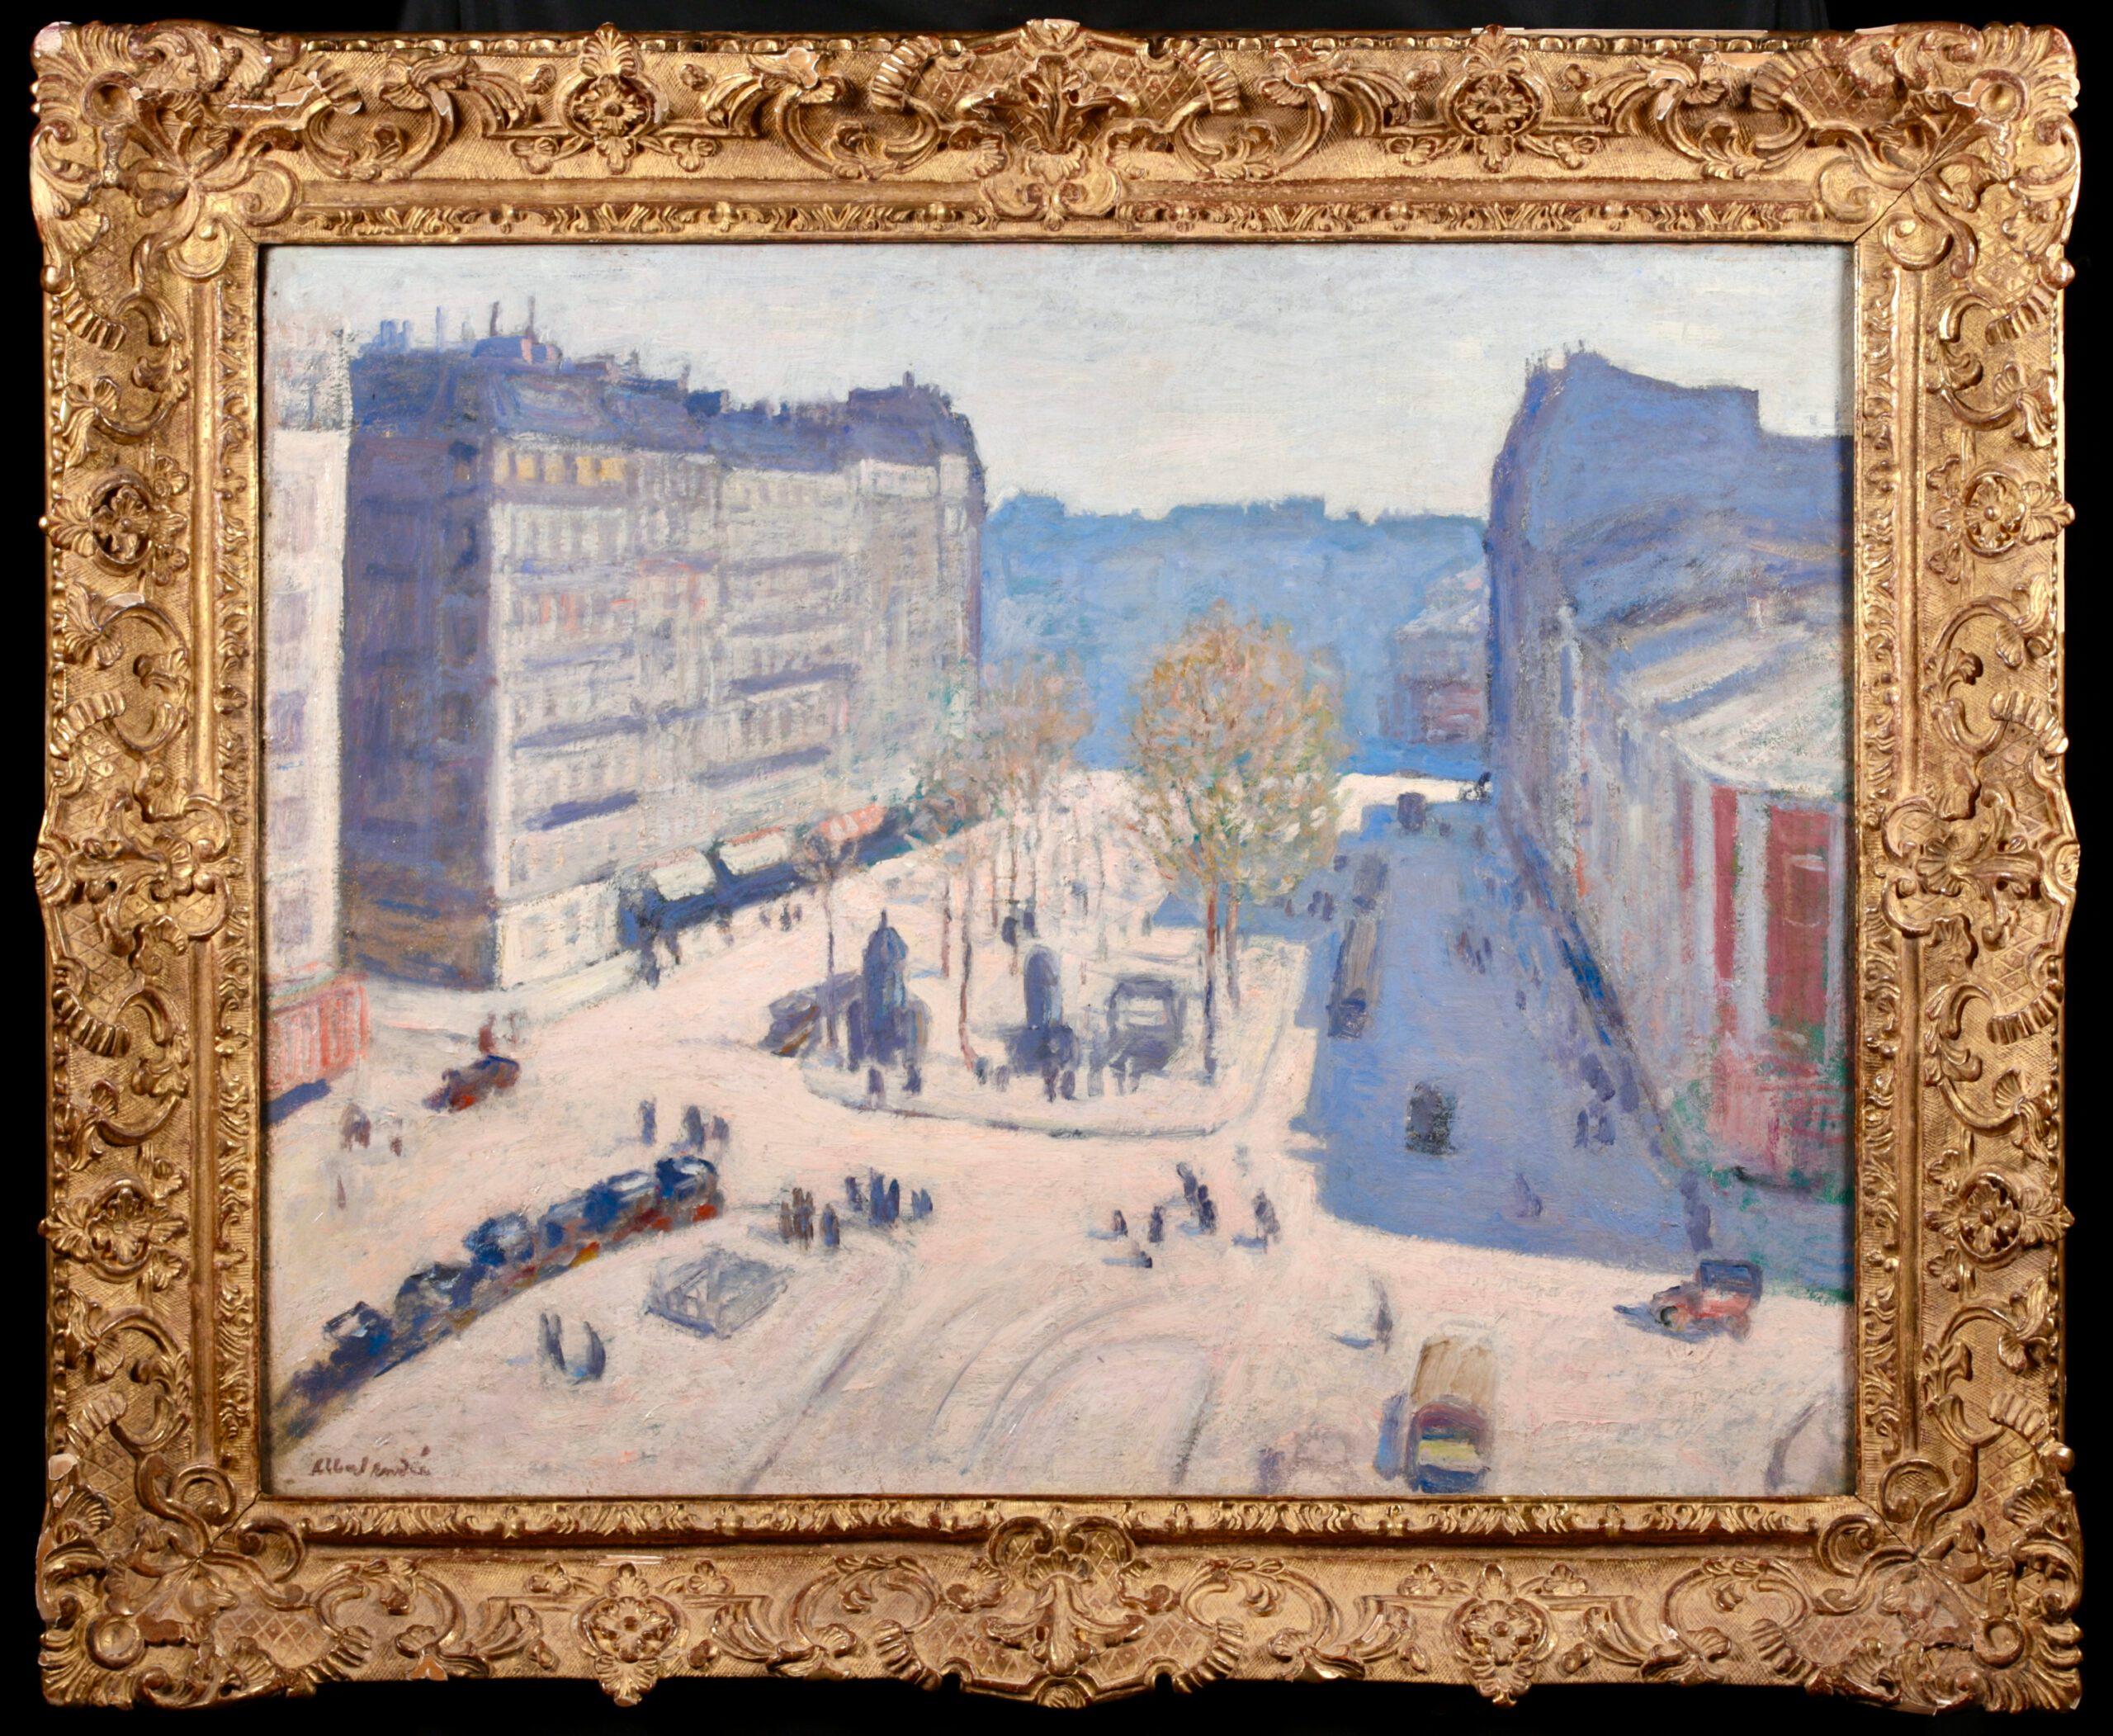 Signed and titled figures in cityscape oil on canvas circa 1920 by post impressionist painter Albert Andre. This stunning and good-sized work depicts a view of the Boulevard de Clichy, a famous street in the city of Paris, France on what appears to